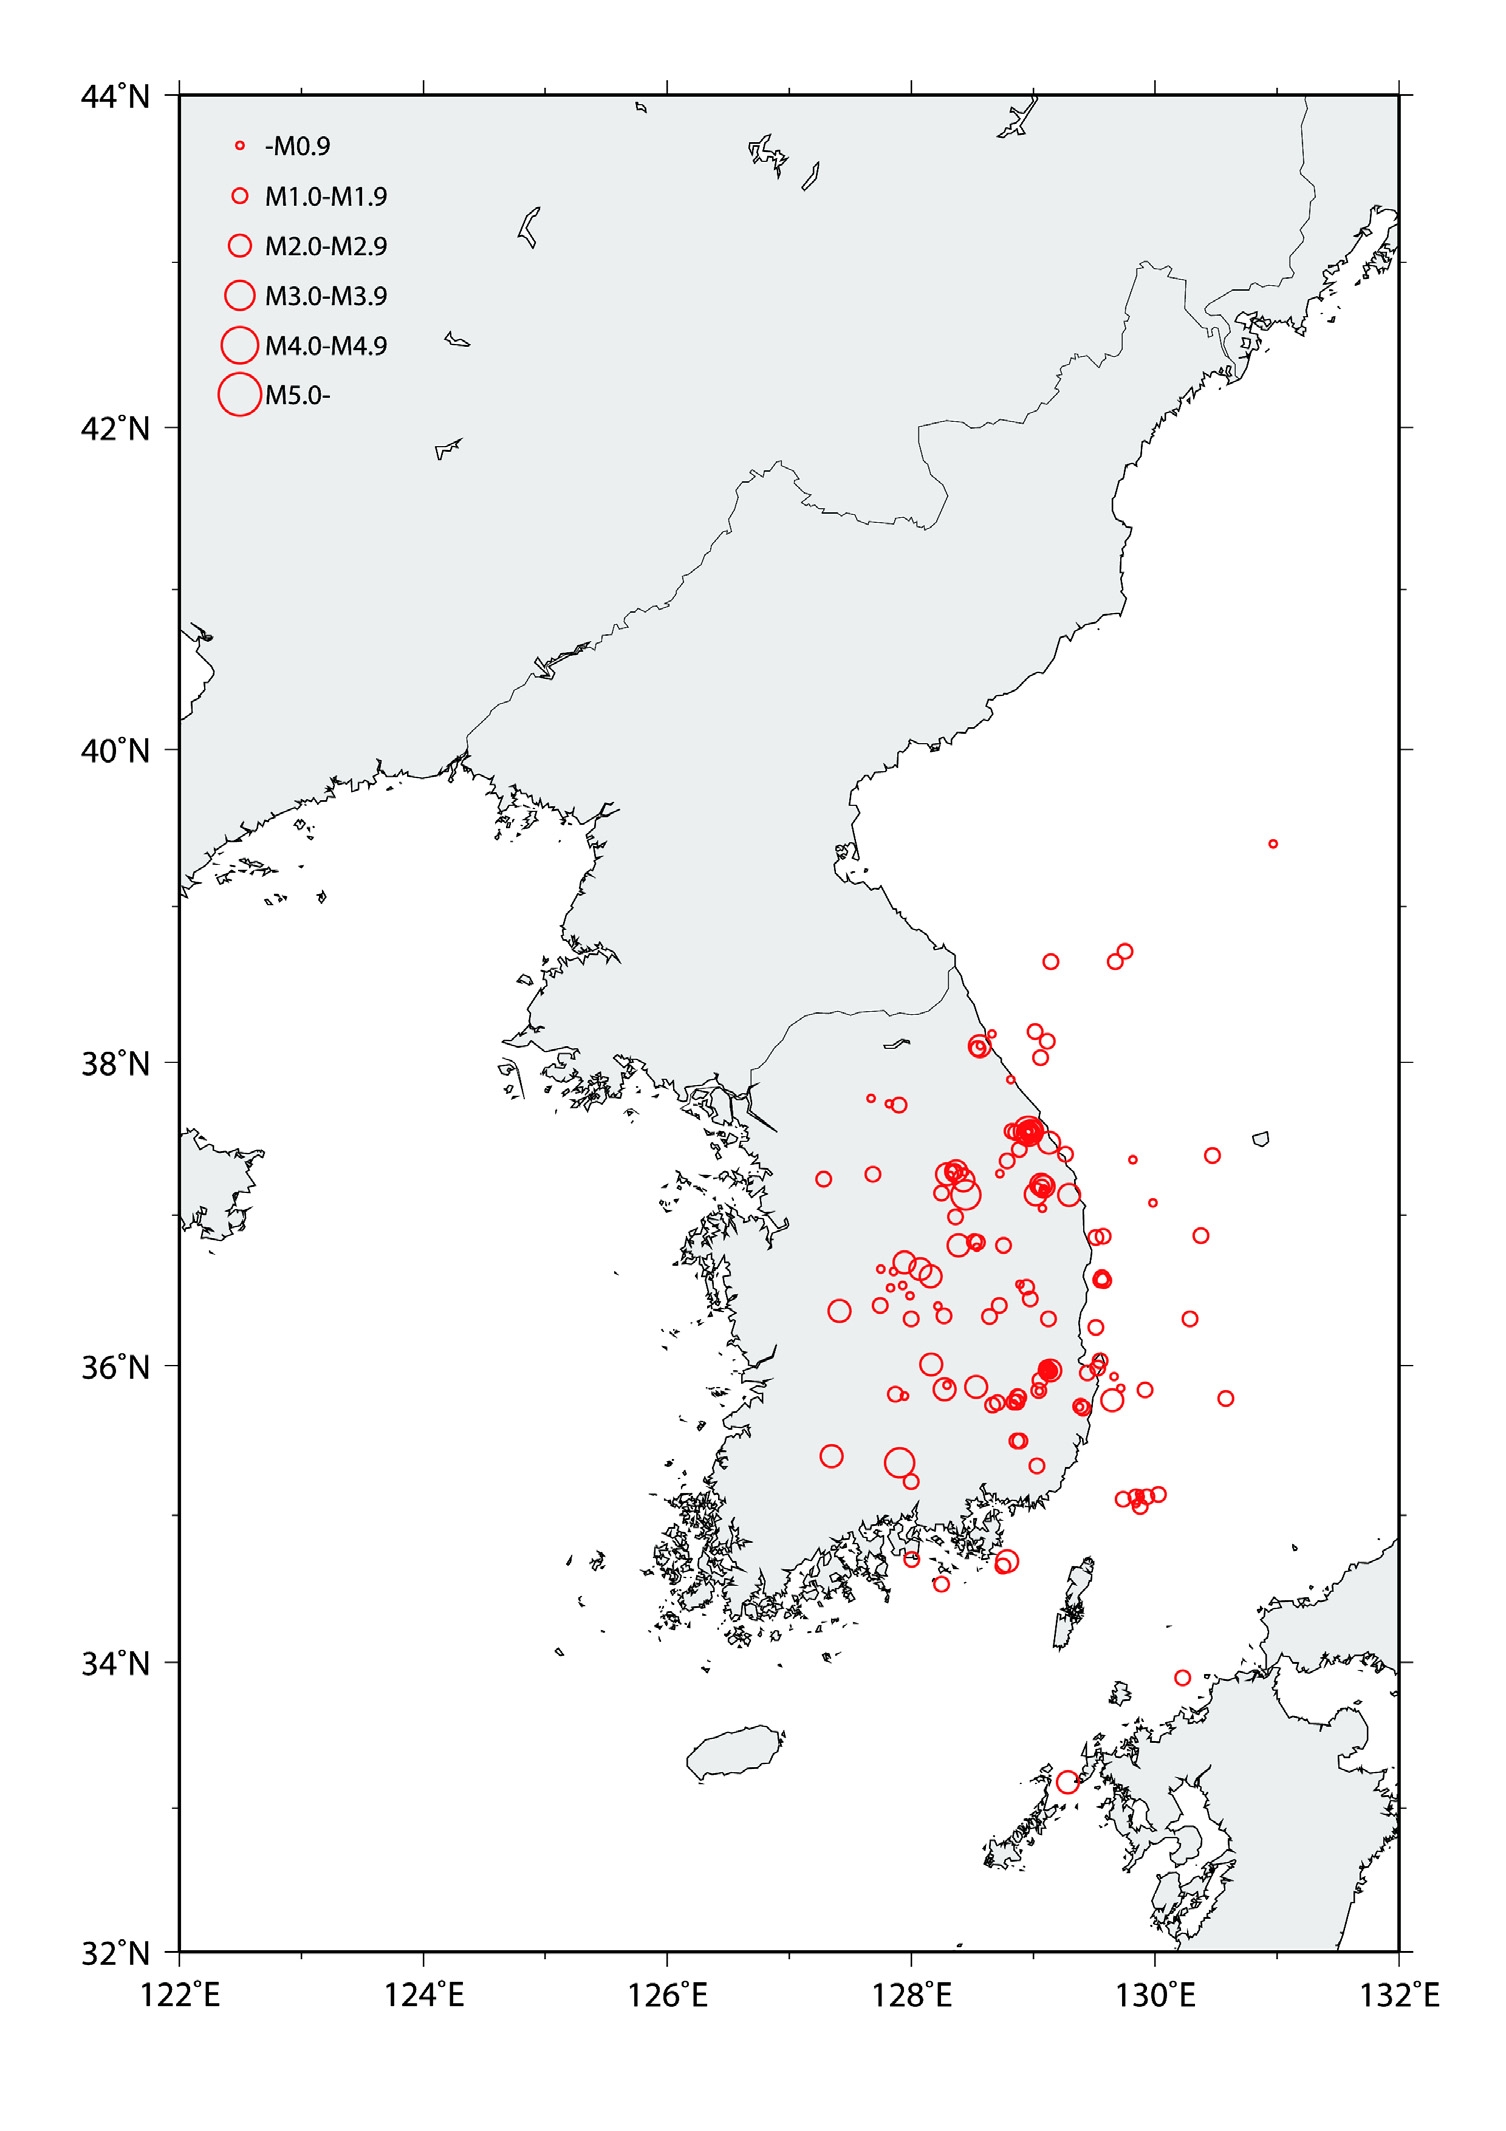 Fig. 2.1.2 Distribution of earthquakes in the Korean Peninsula between October 2011 and April 2012